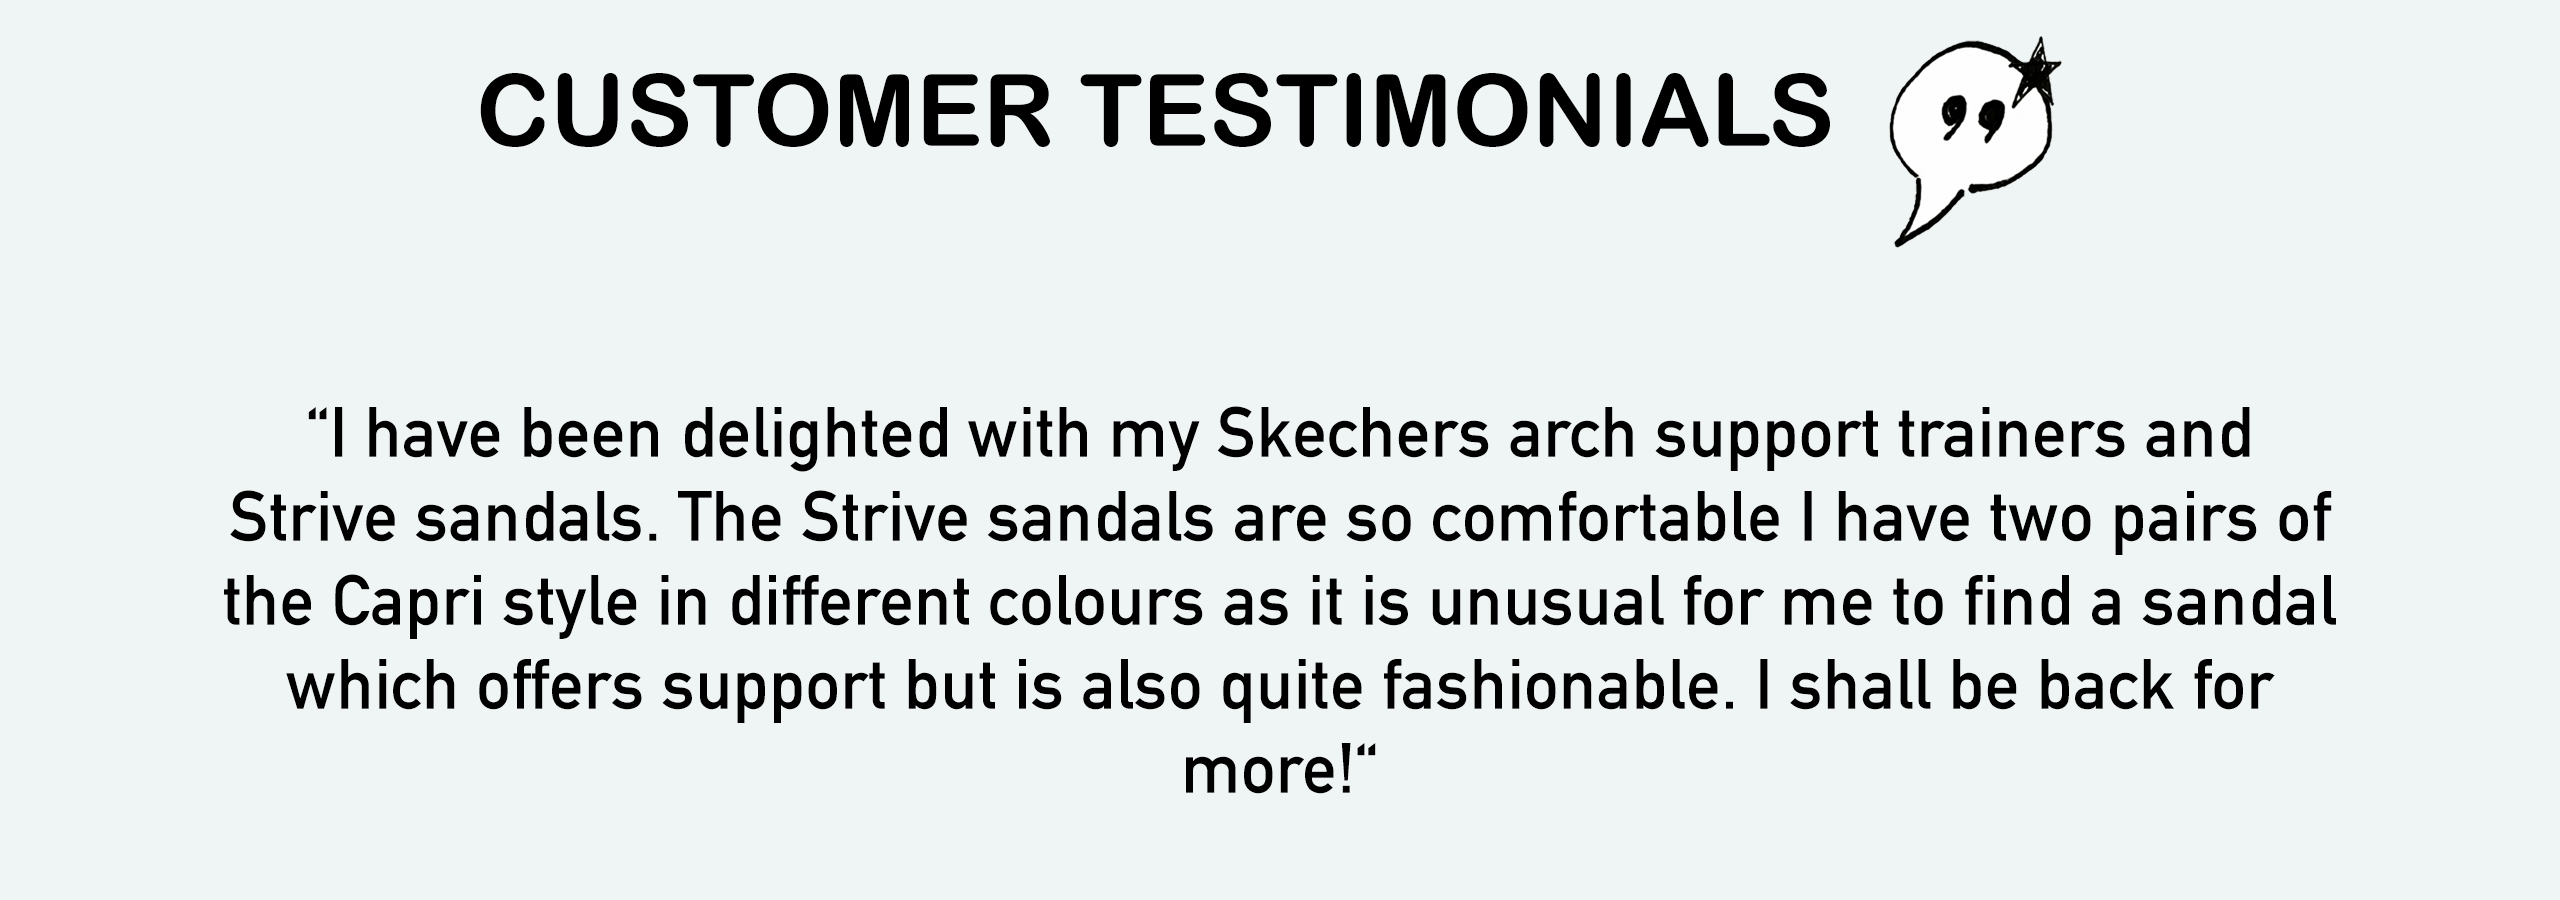 testimonial skechers arch support